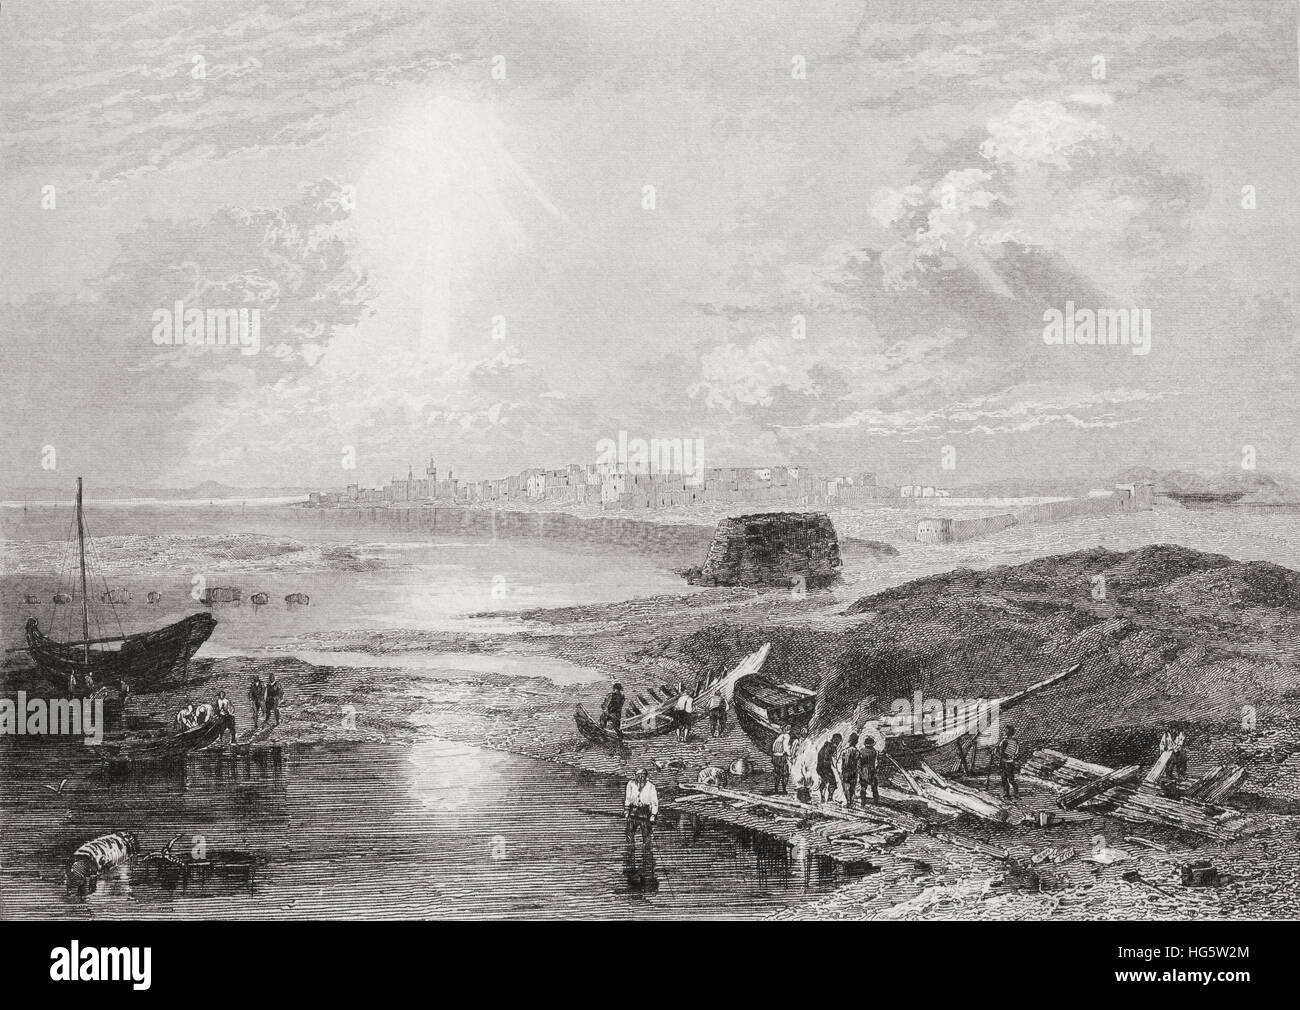 The Red Sea at Suez, Egypt, Palestine. 19th century steel engraving by Lemaitre direxit. Stock Photo